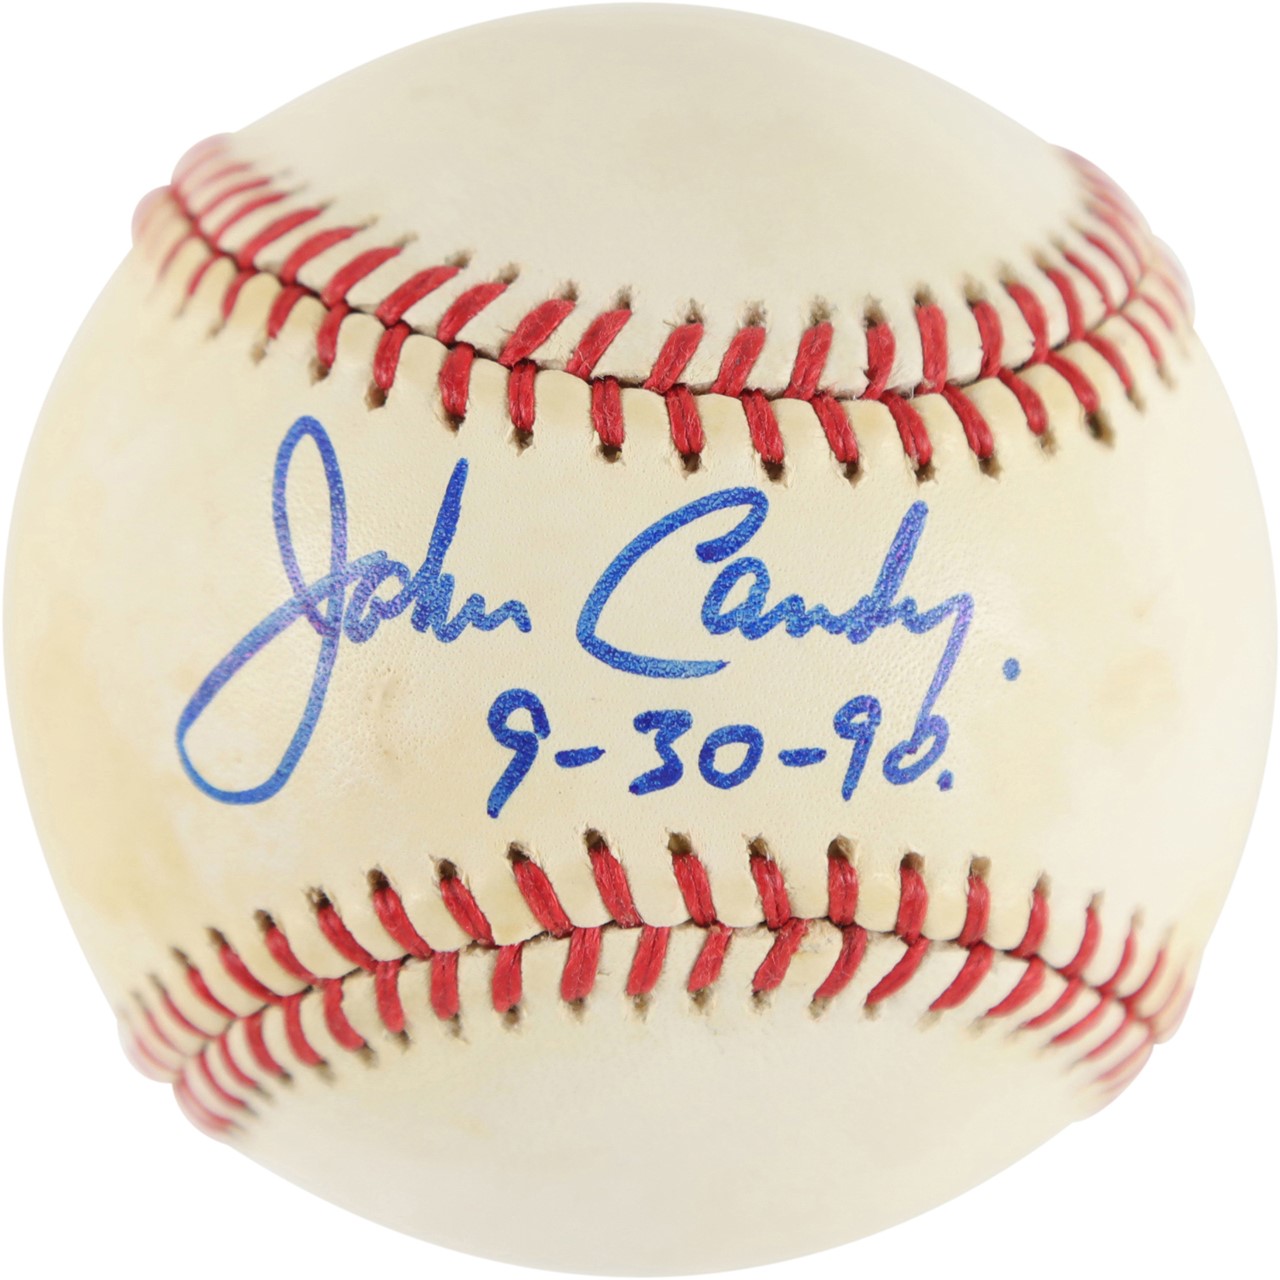 9/30/90 John Candy Single-Signed Baseball Obtained in Person by MLB Scout at White Sox Game (PSA)